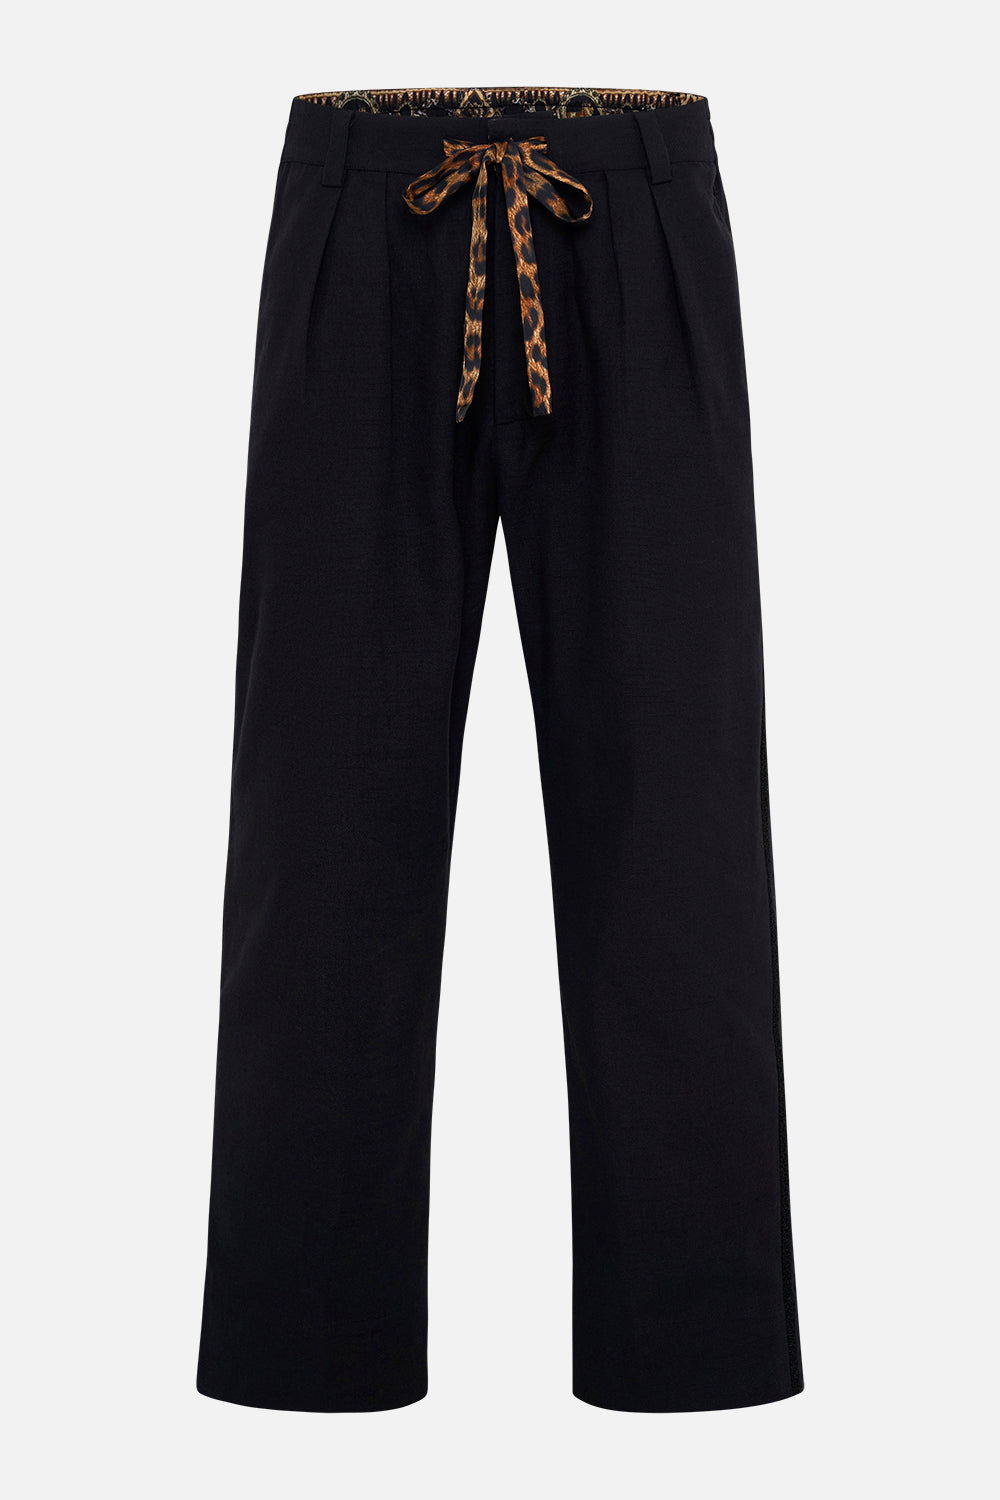 Product view of Hotel Franks by CAMILLA mens black pleat front pants Jungle Dreaming 